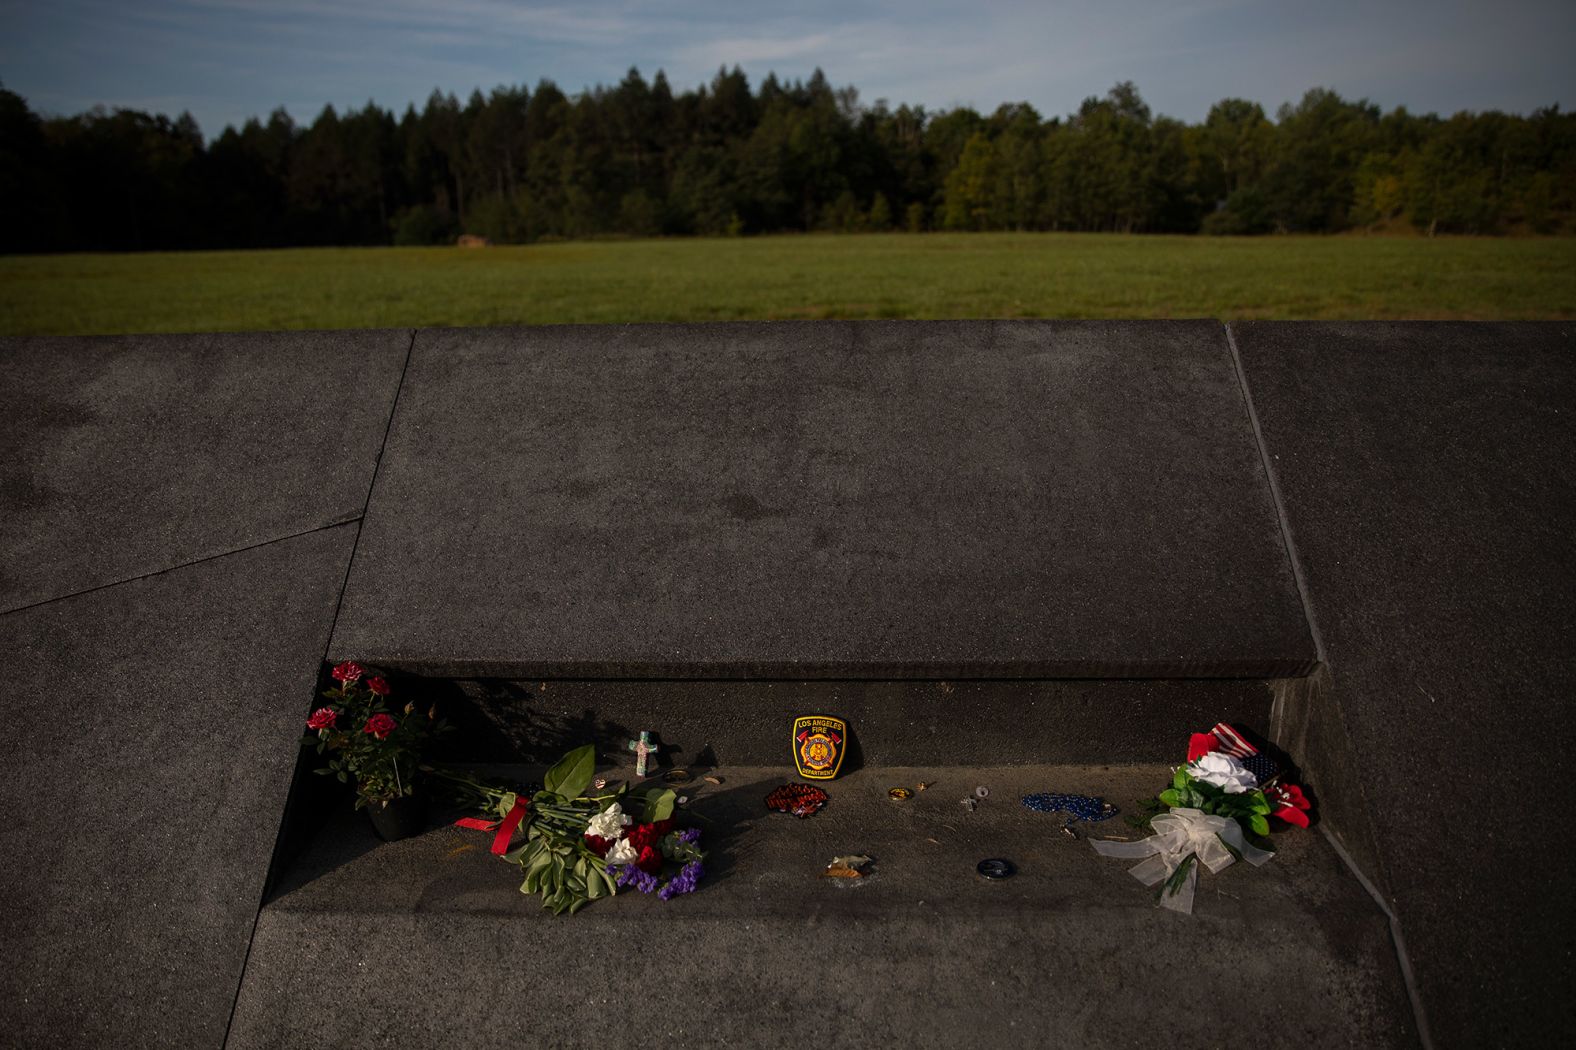 Flowers are placed at the memorial near Shanksville.